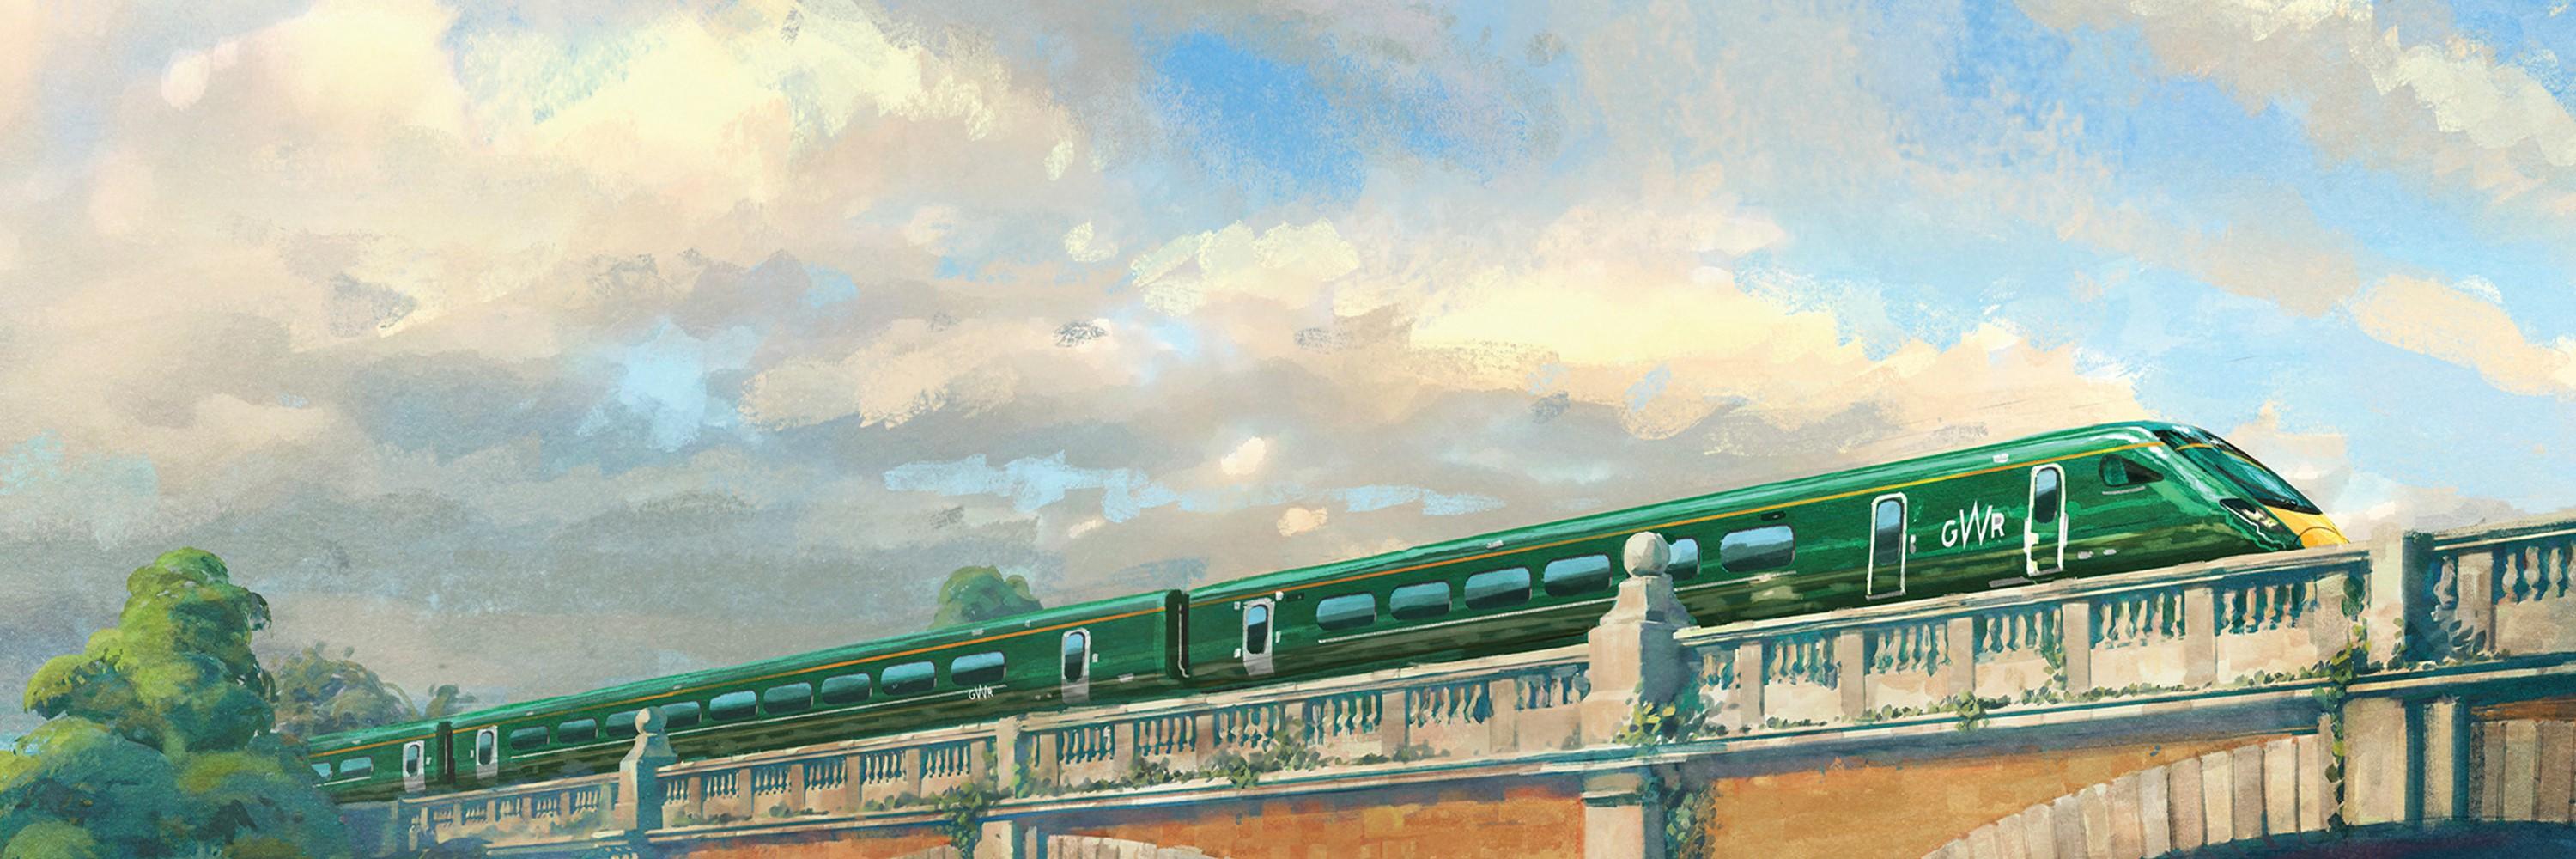 Illustration of a GWR train passing over a bridge